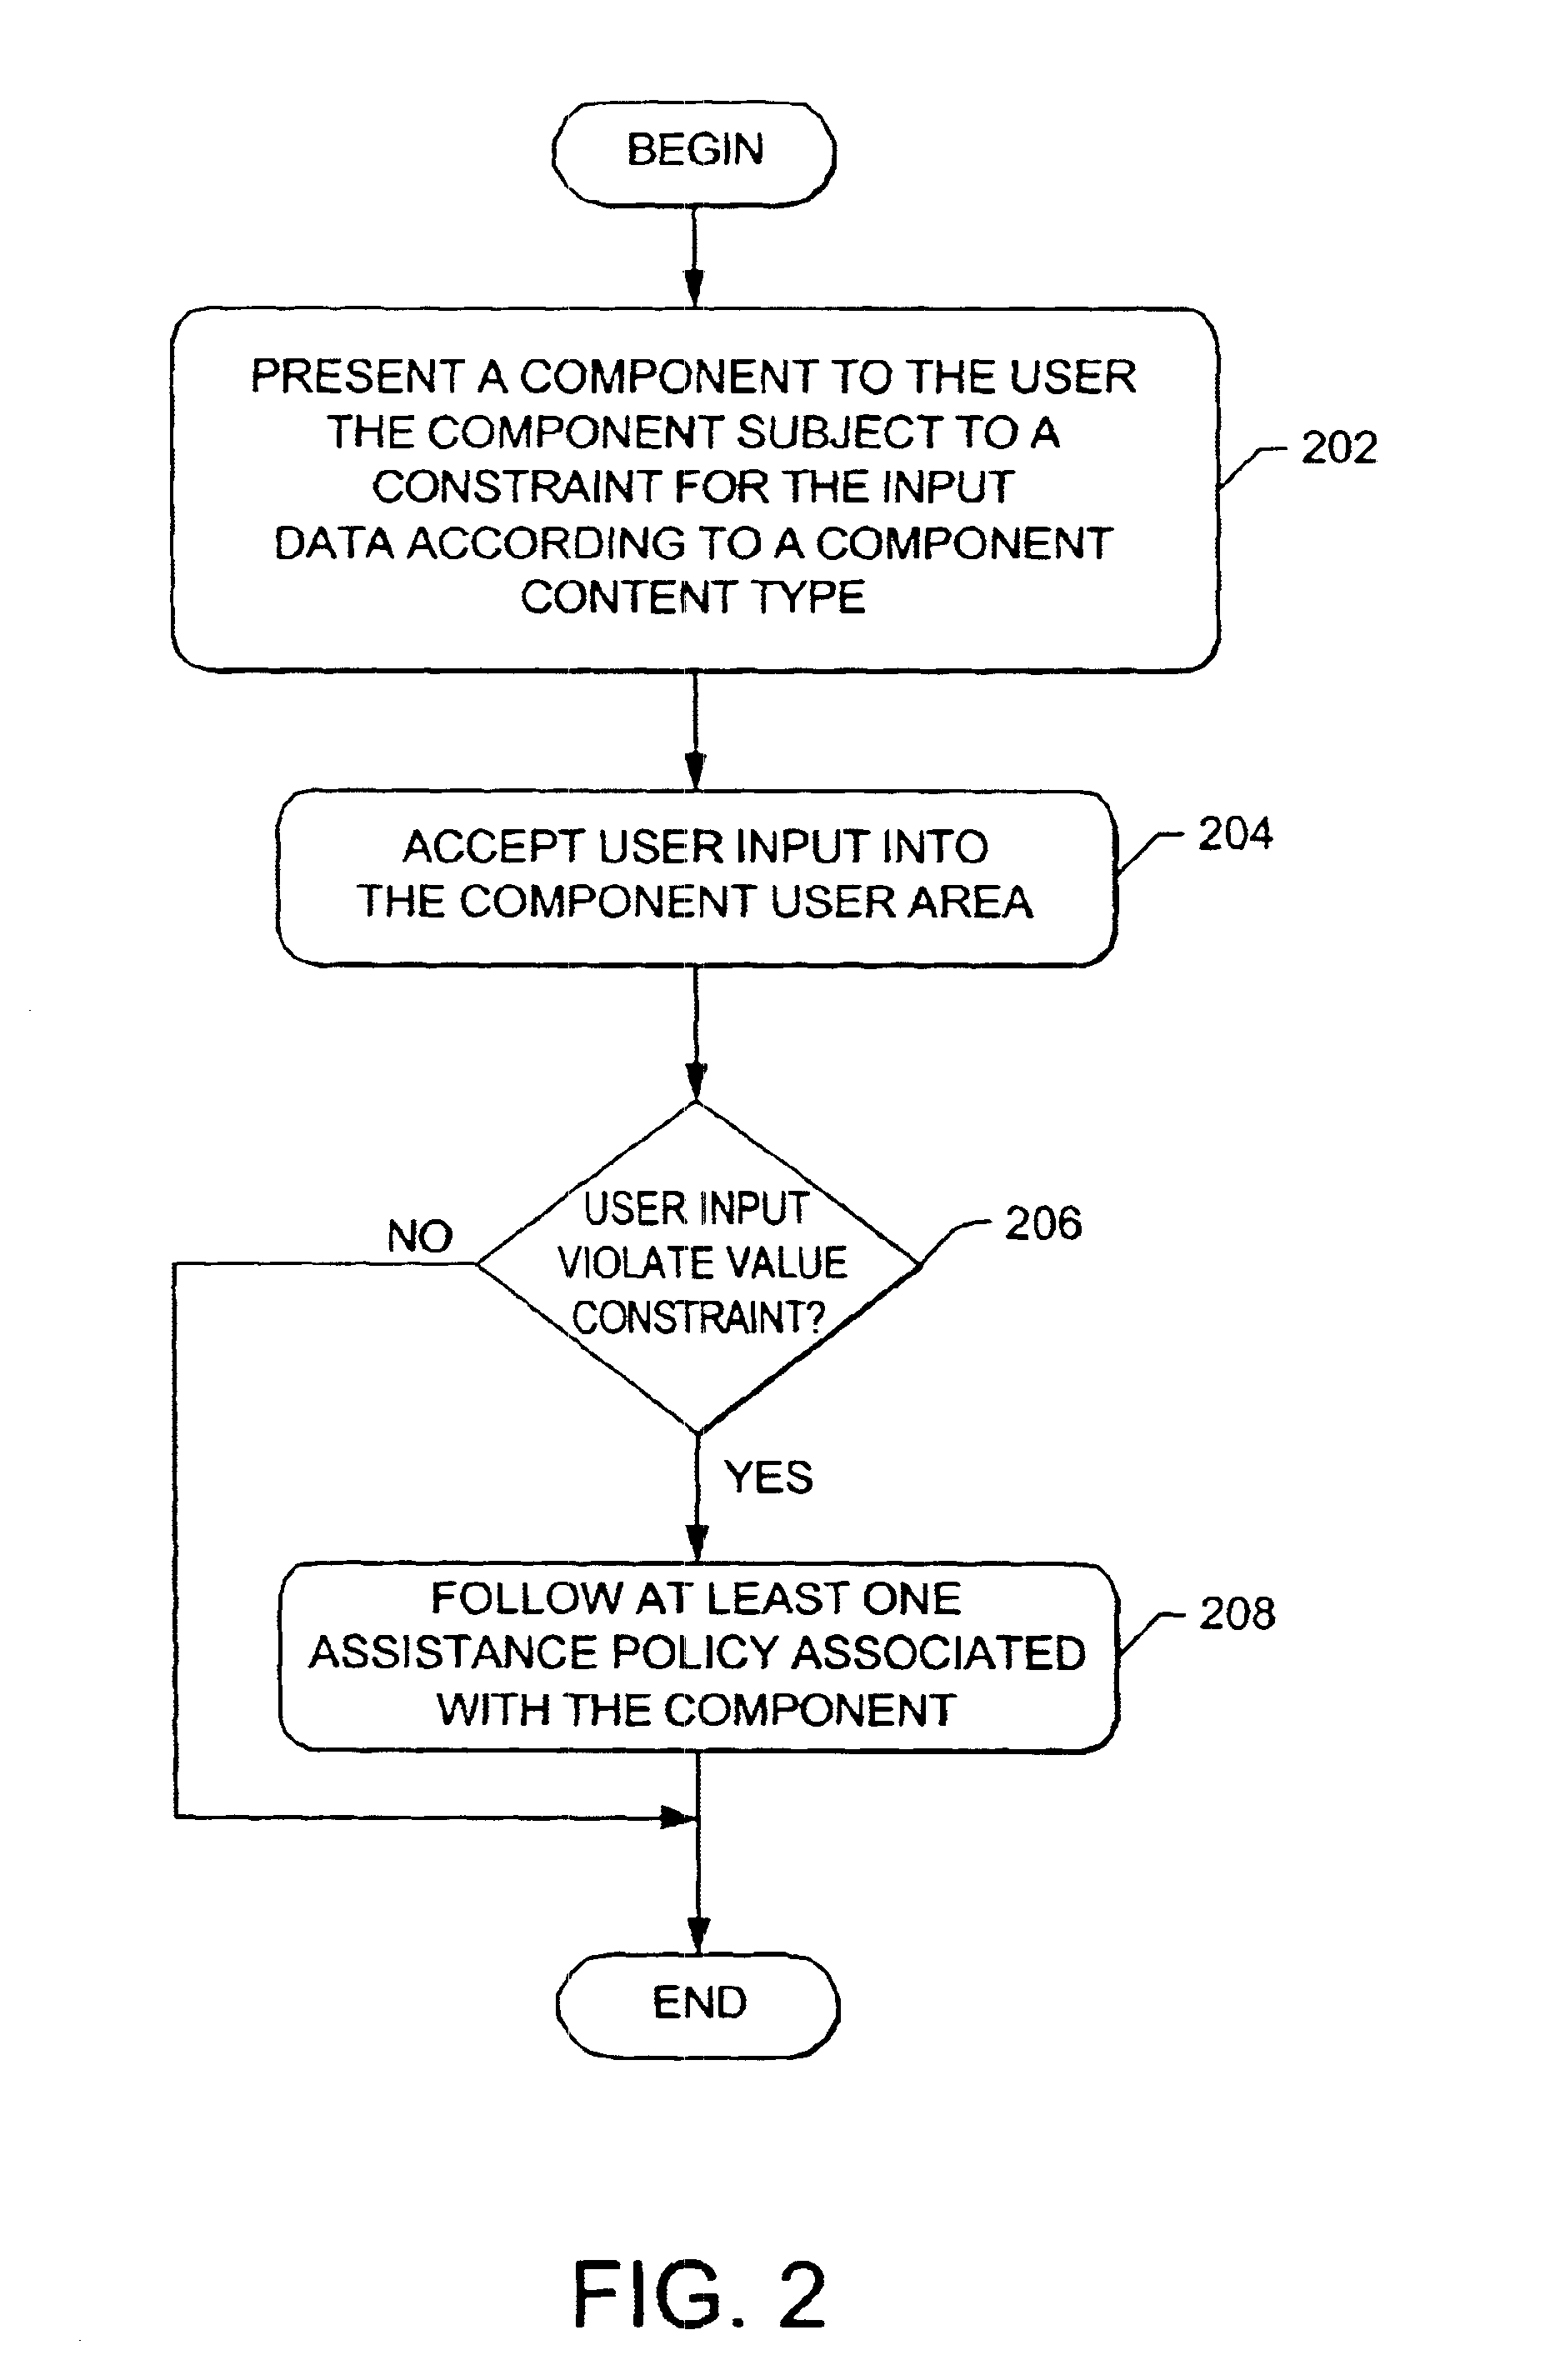 Self-diagnosing and self-correcting data entry components with dependency behavior